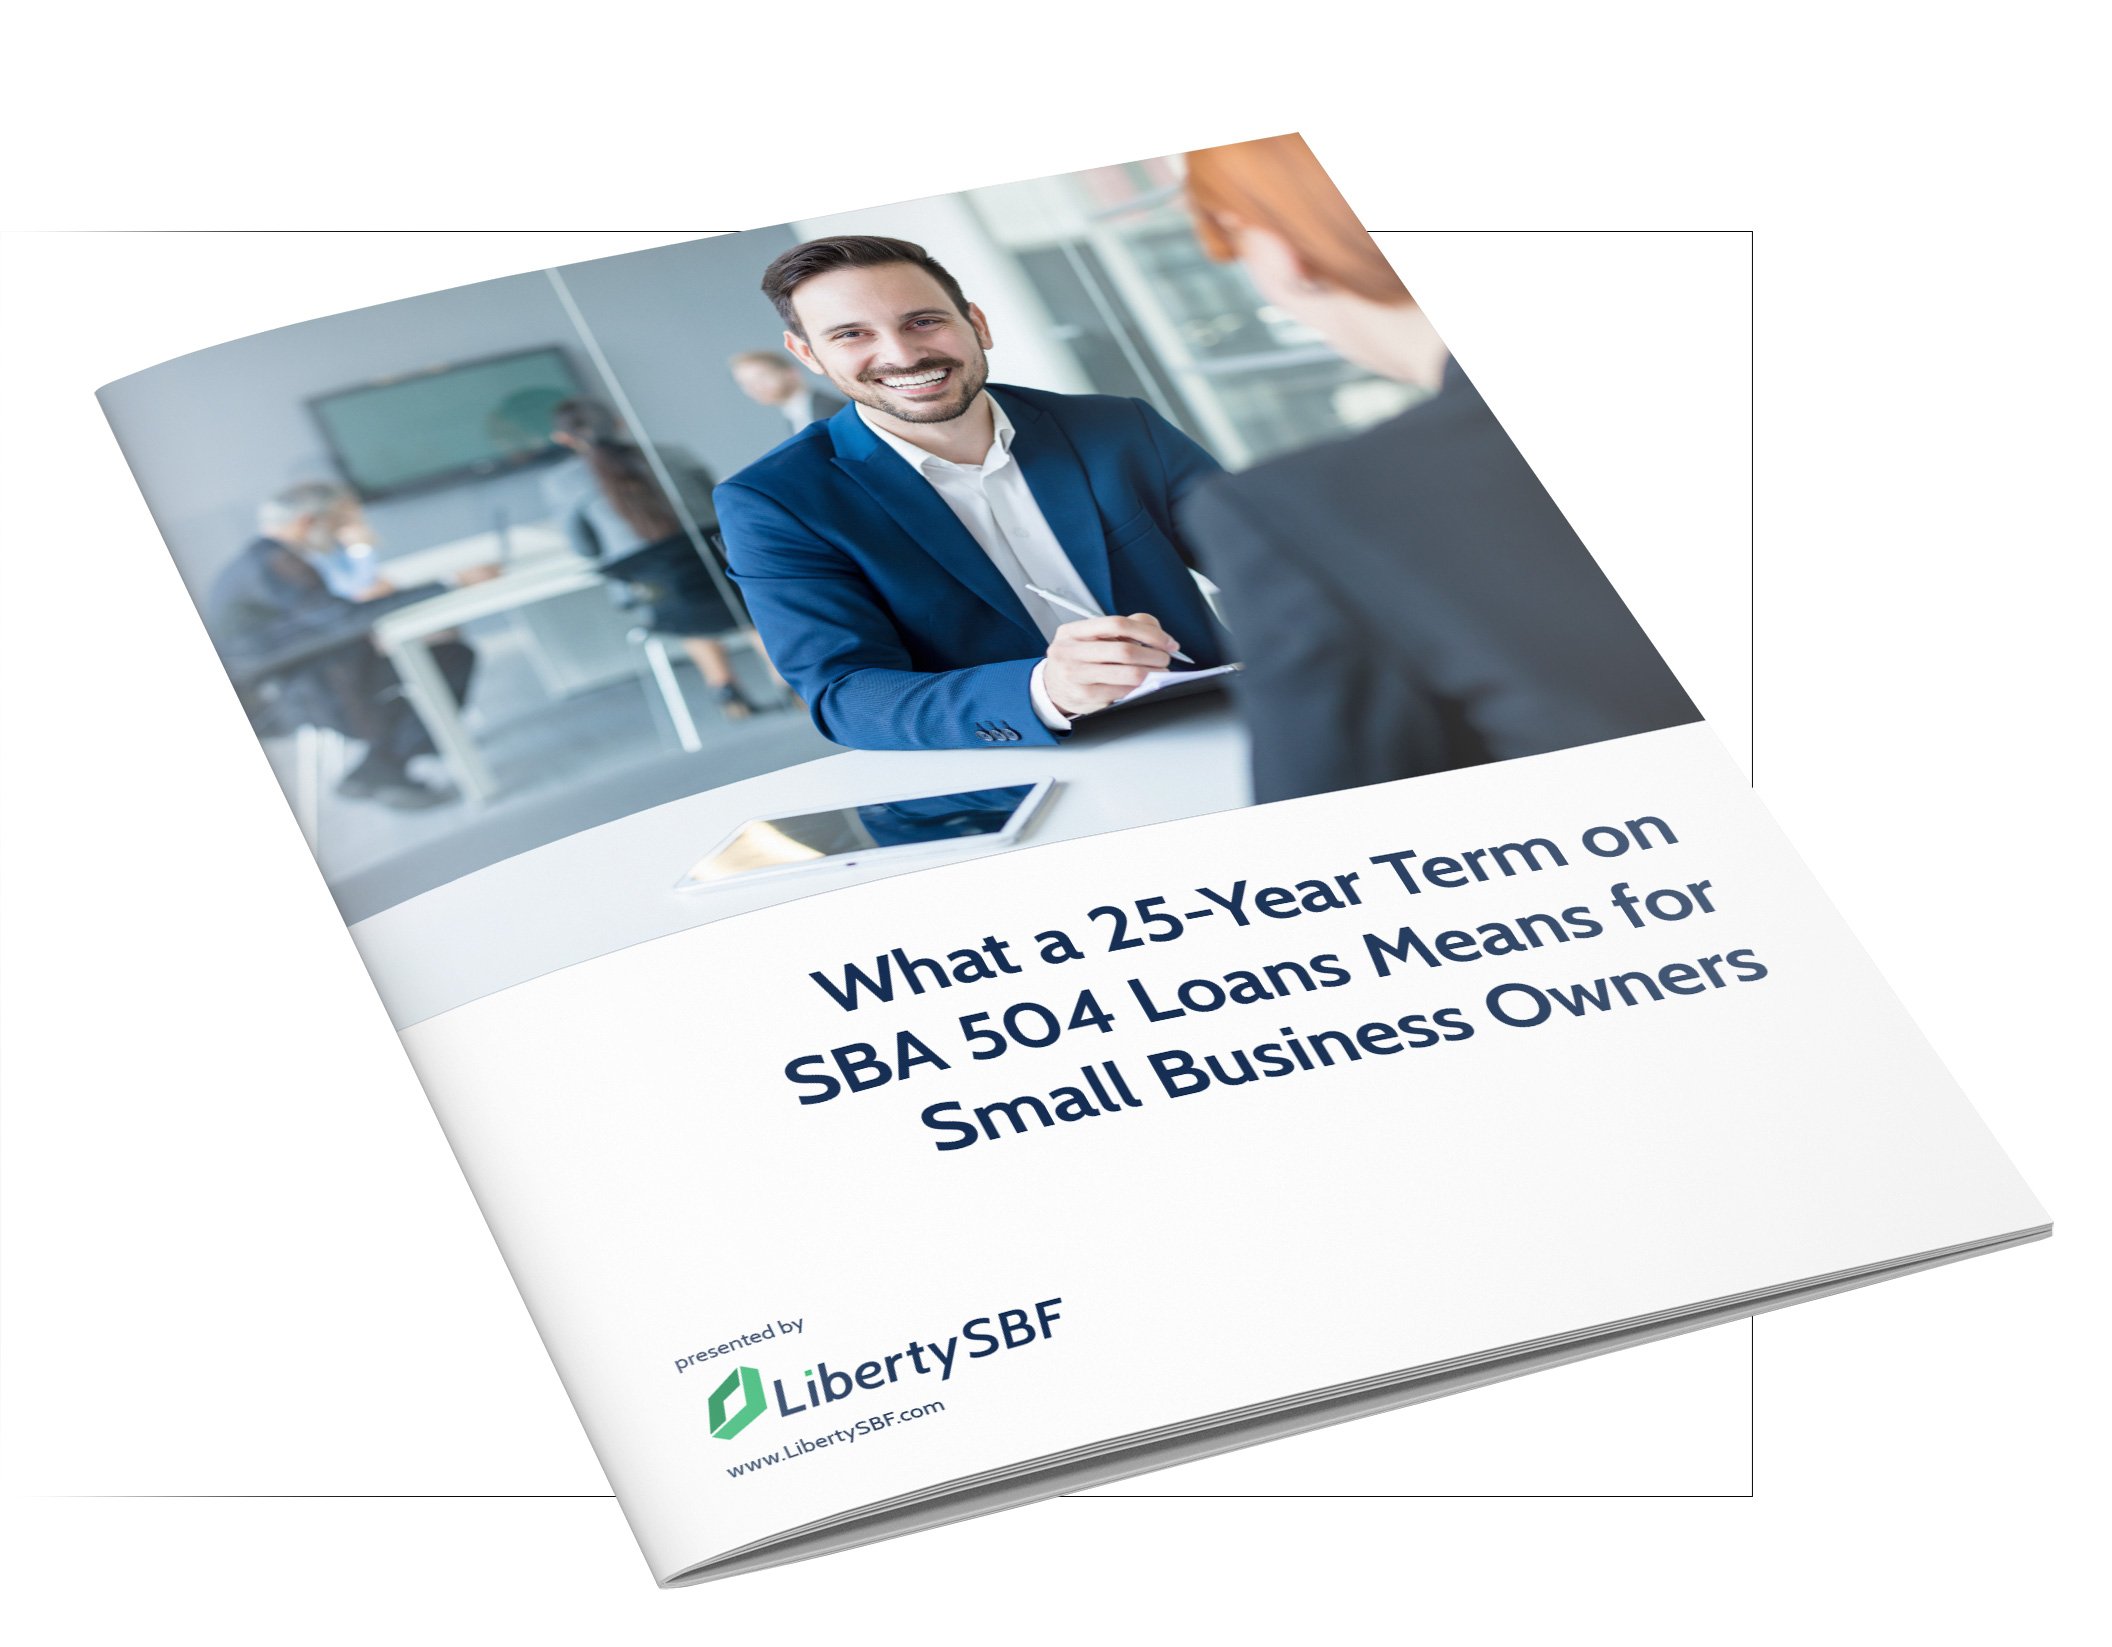 What-a-25-Year-Term-on-SBA-504-Loans-Means-for-Small-Business-Owners